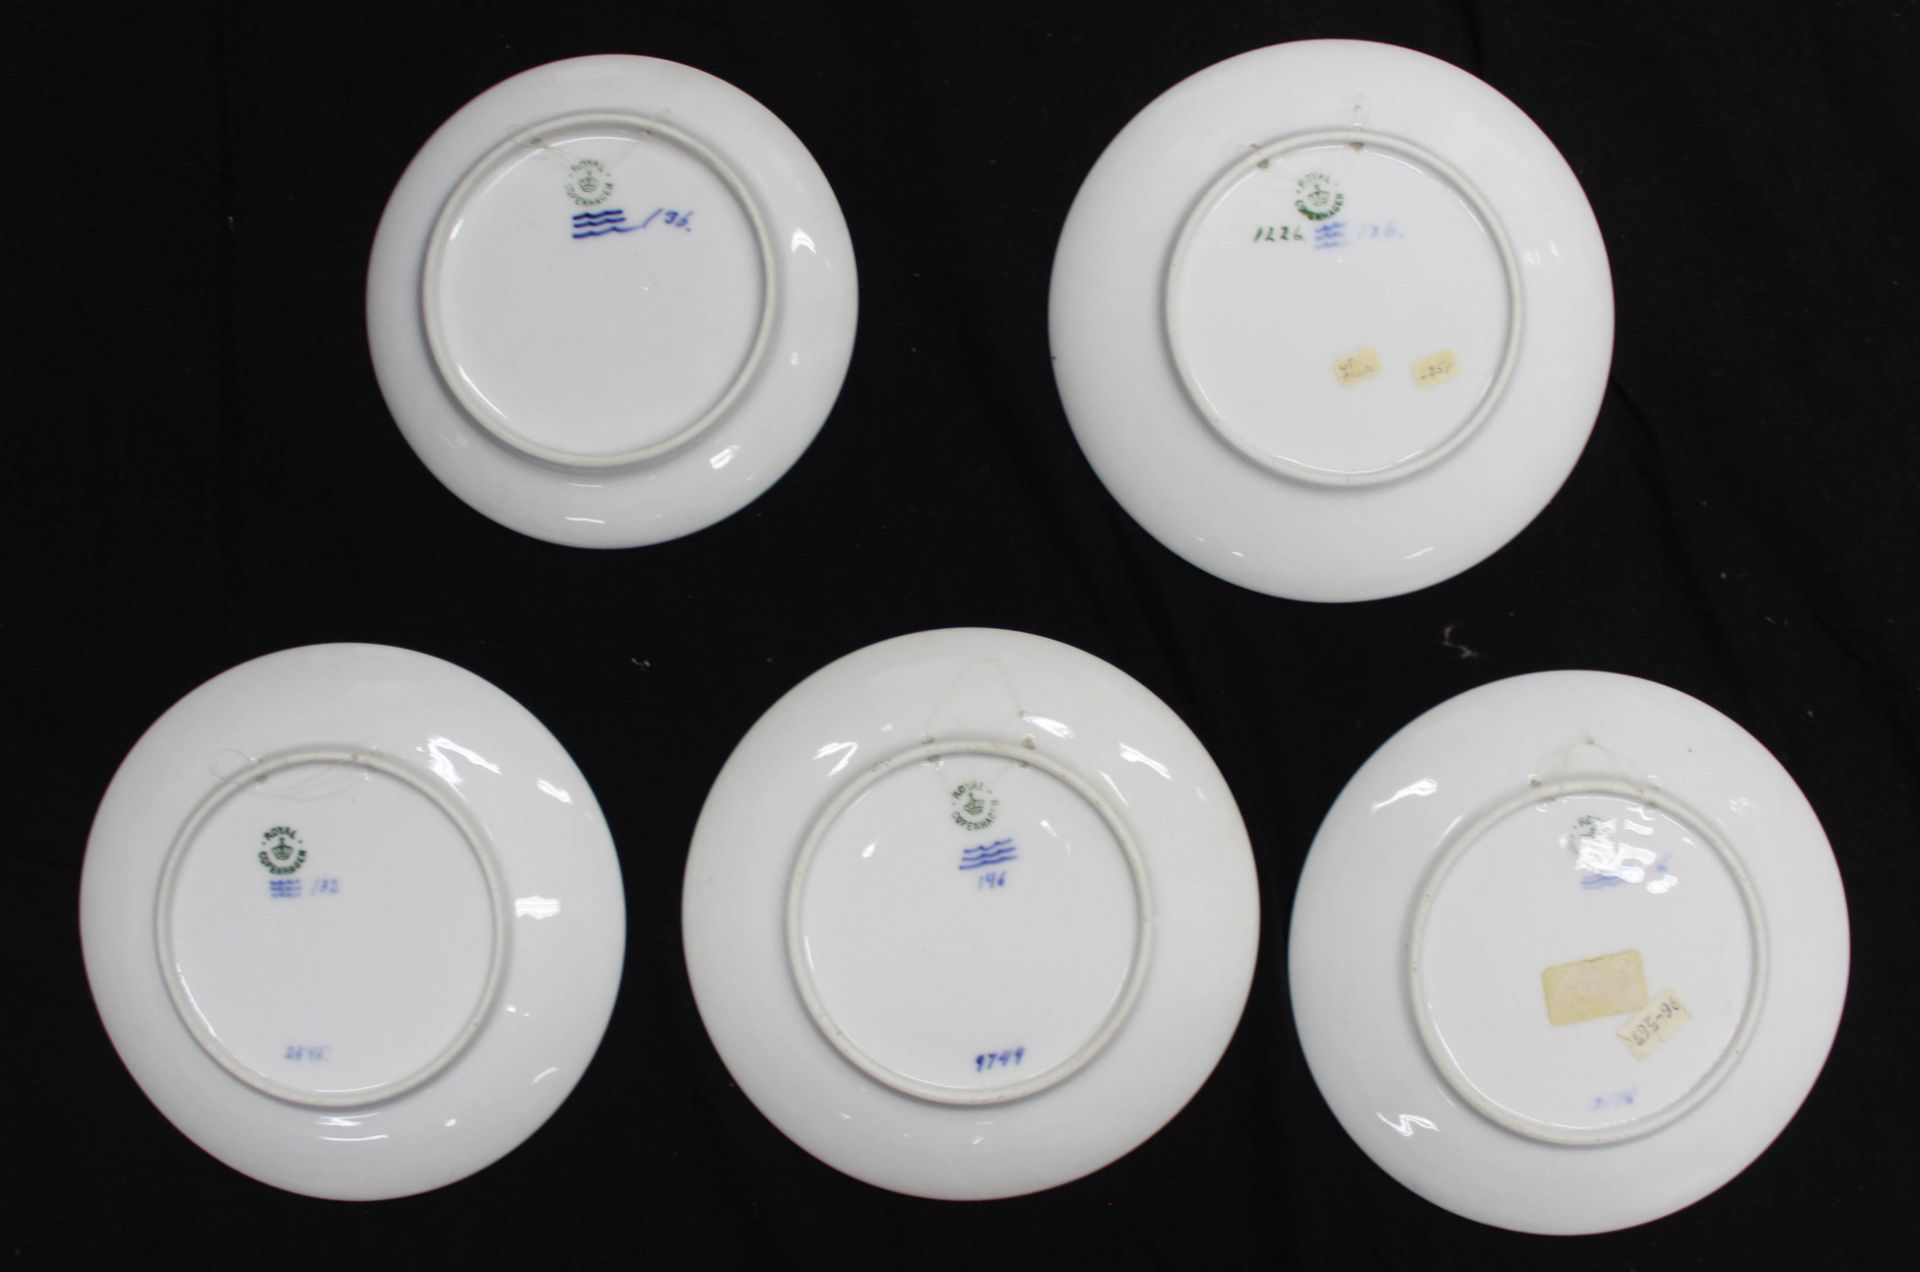 94 Christmas plates - Royal Copenhagen. Complete series from 1910-2004. - Image 19 of 28